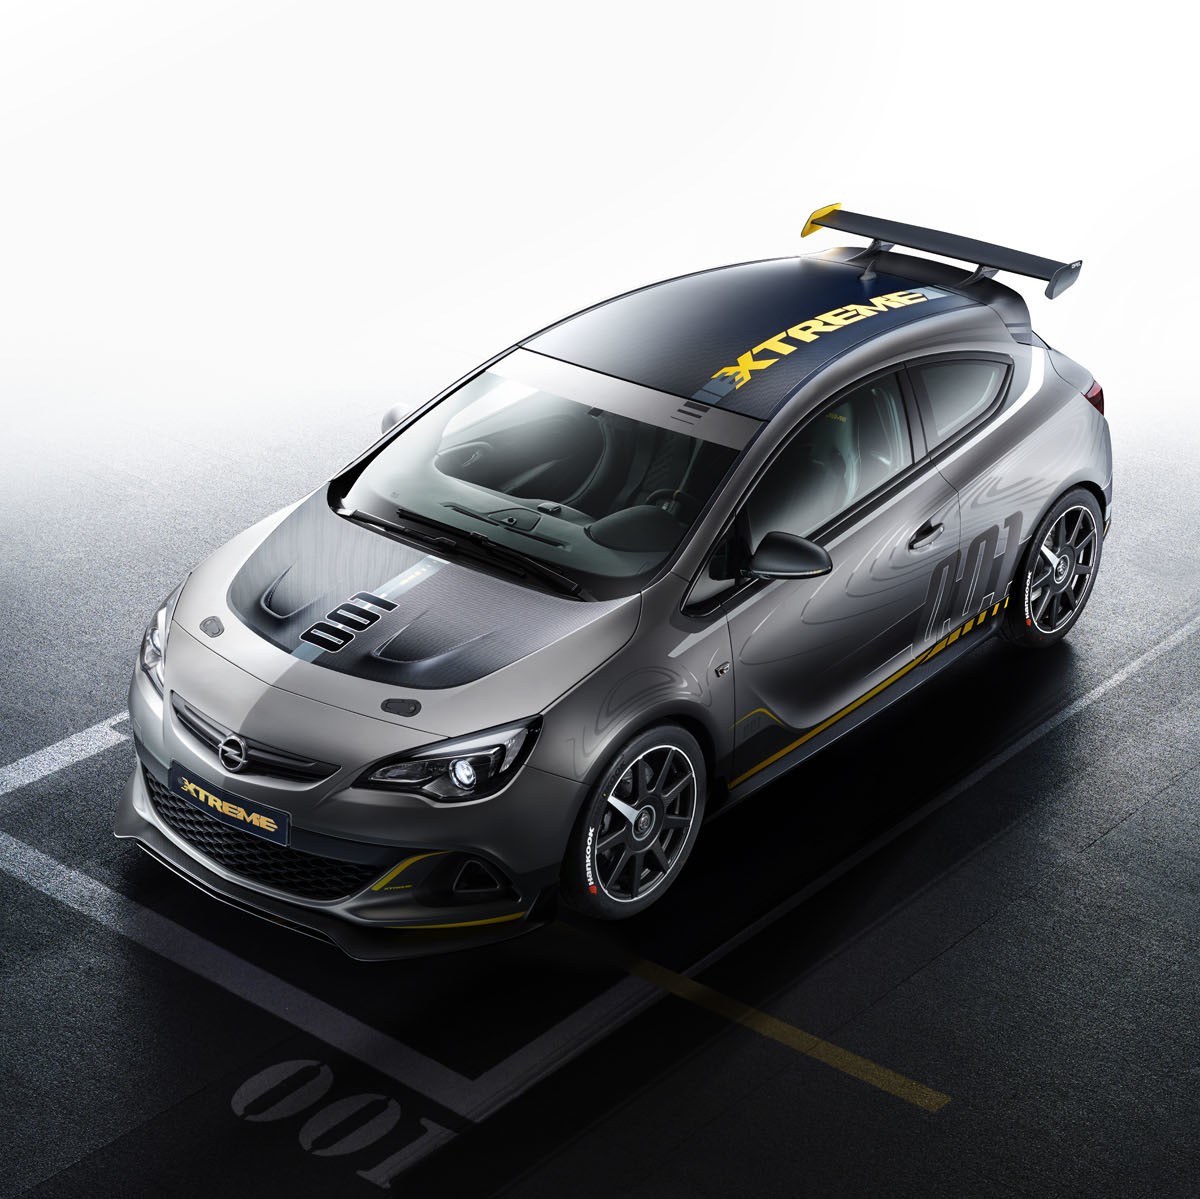 Astra OPC Extreme